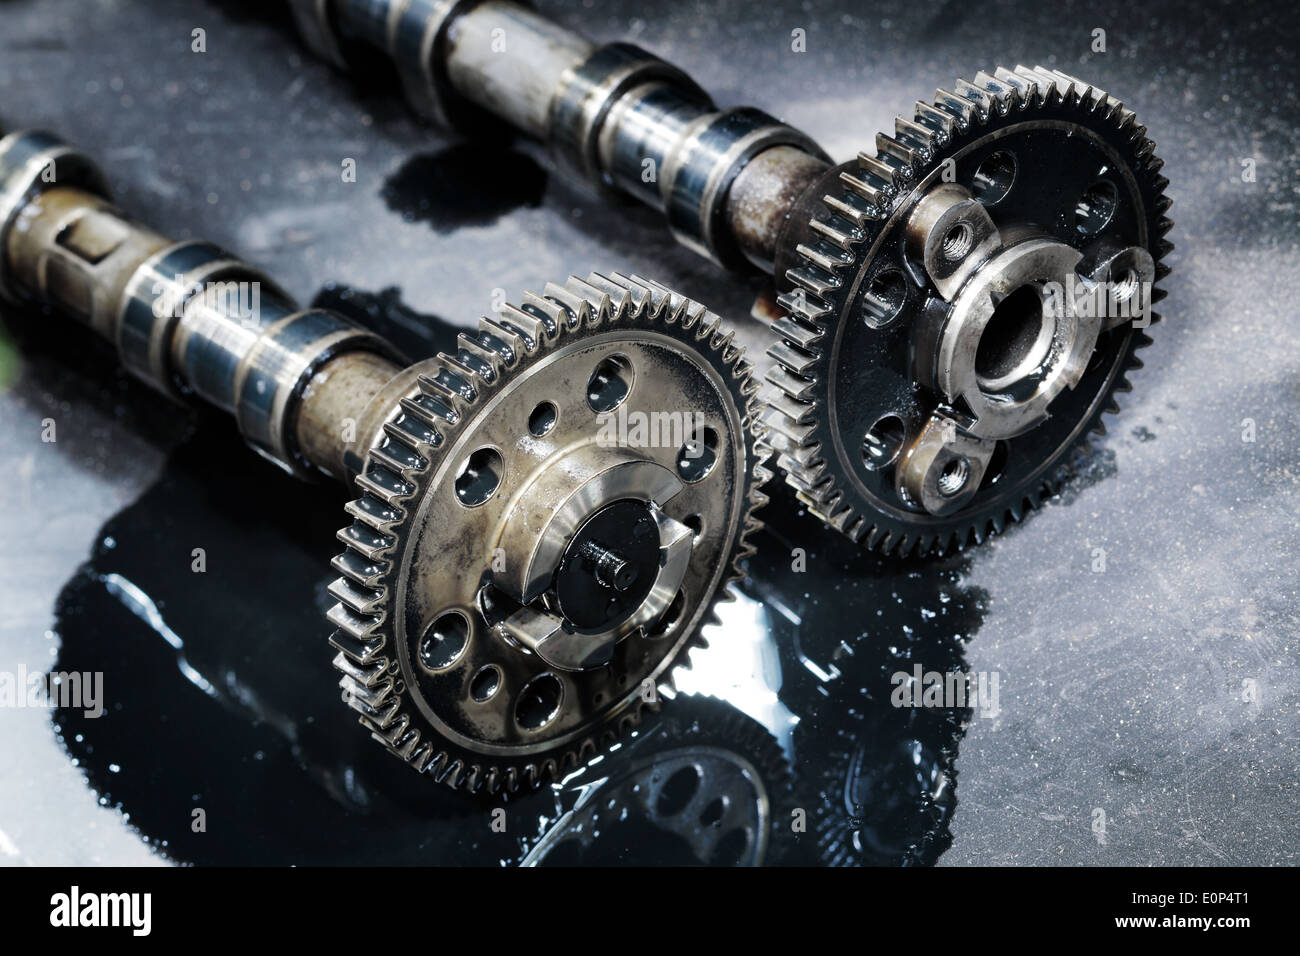 cam shaft of a turbo diesel engine on a dark background Stock Photo